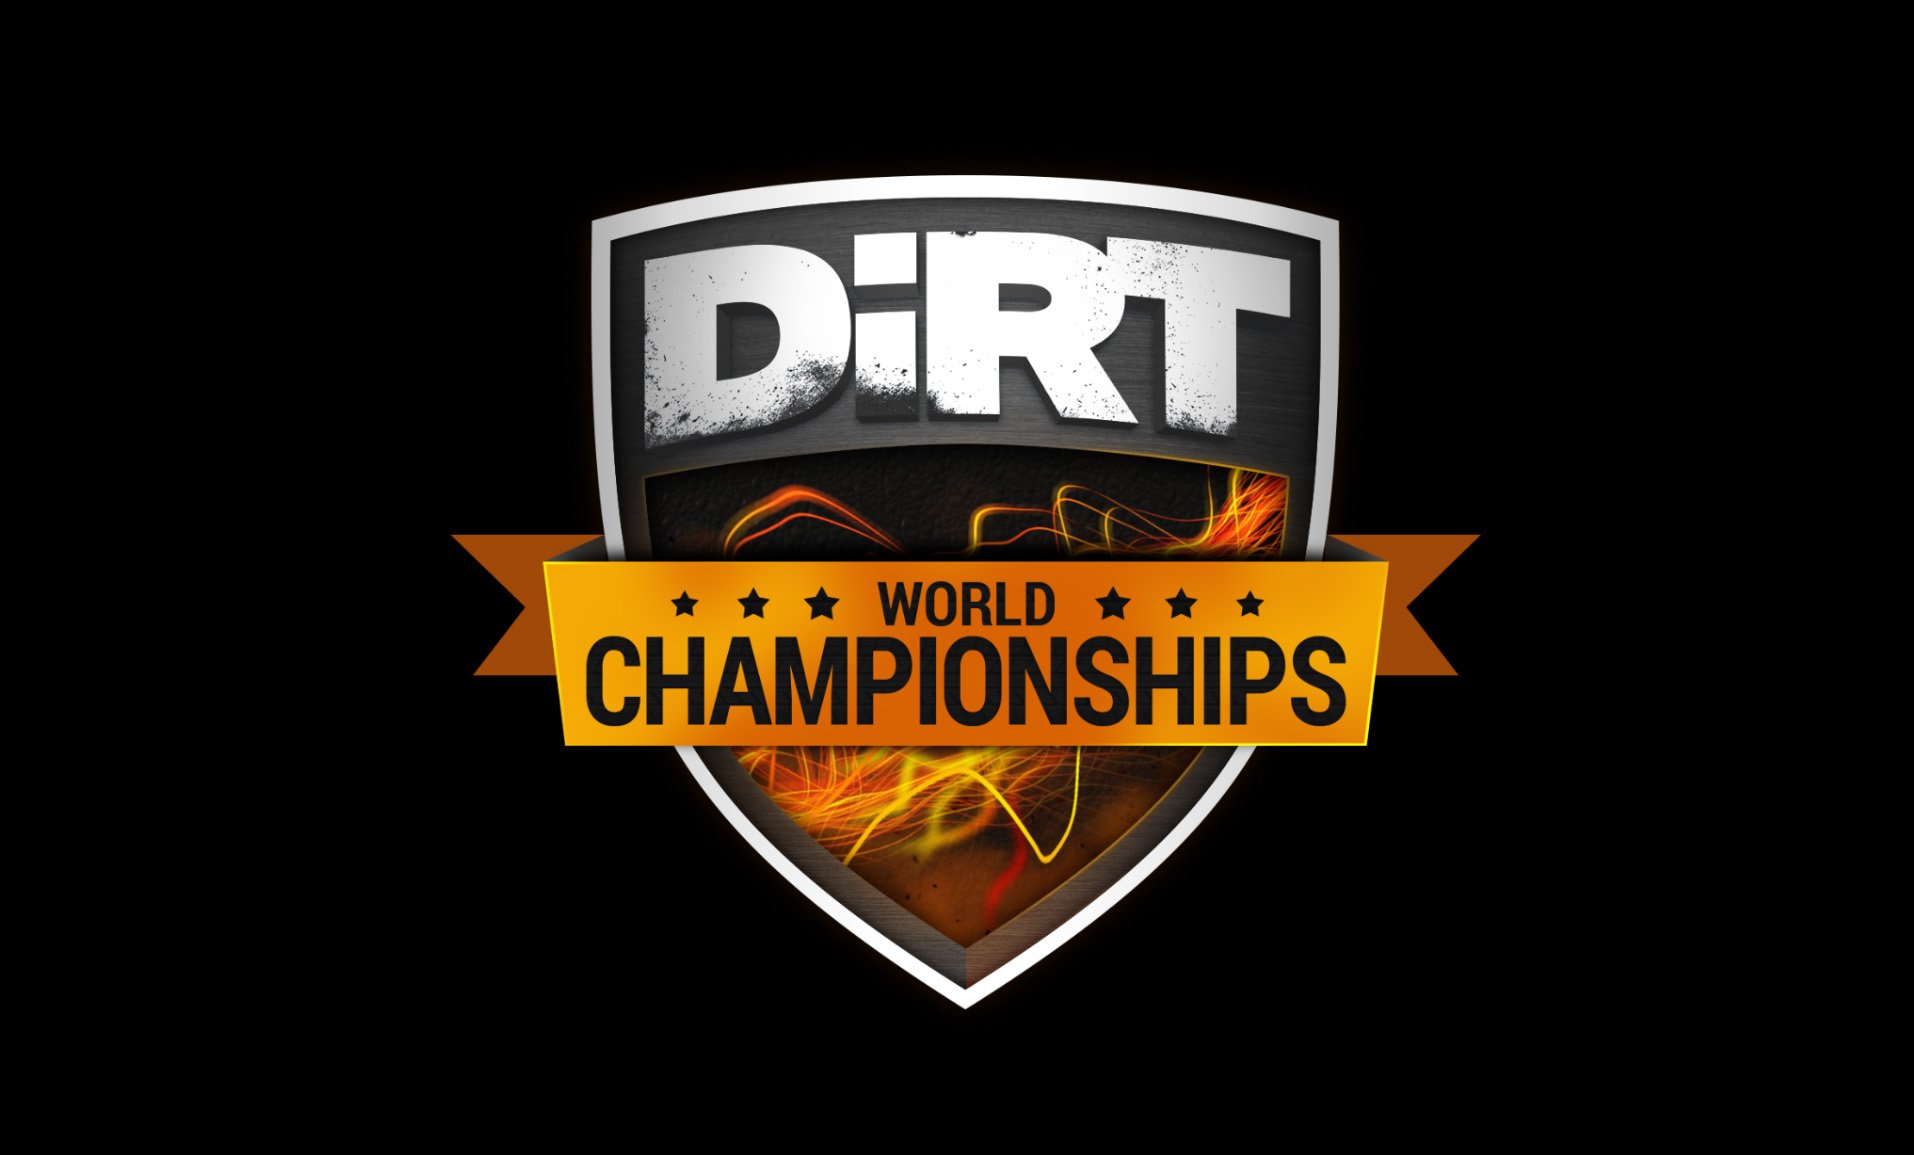 More information about "Codemasters lancia il DiRT World Championships con DiRT 4"